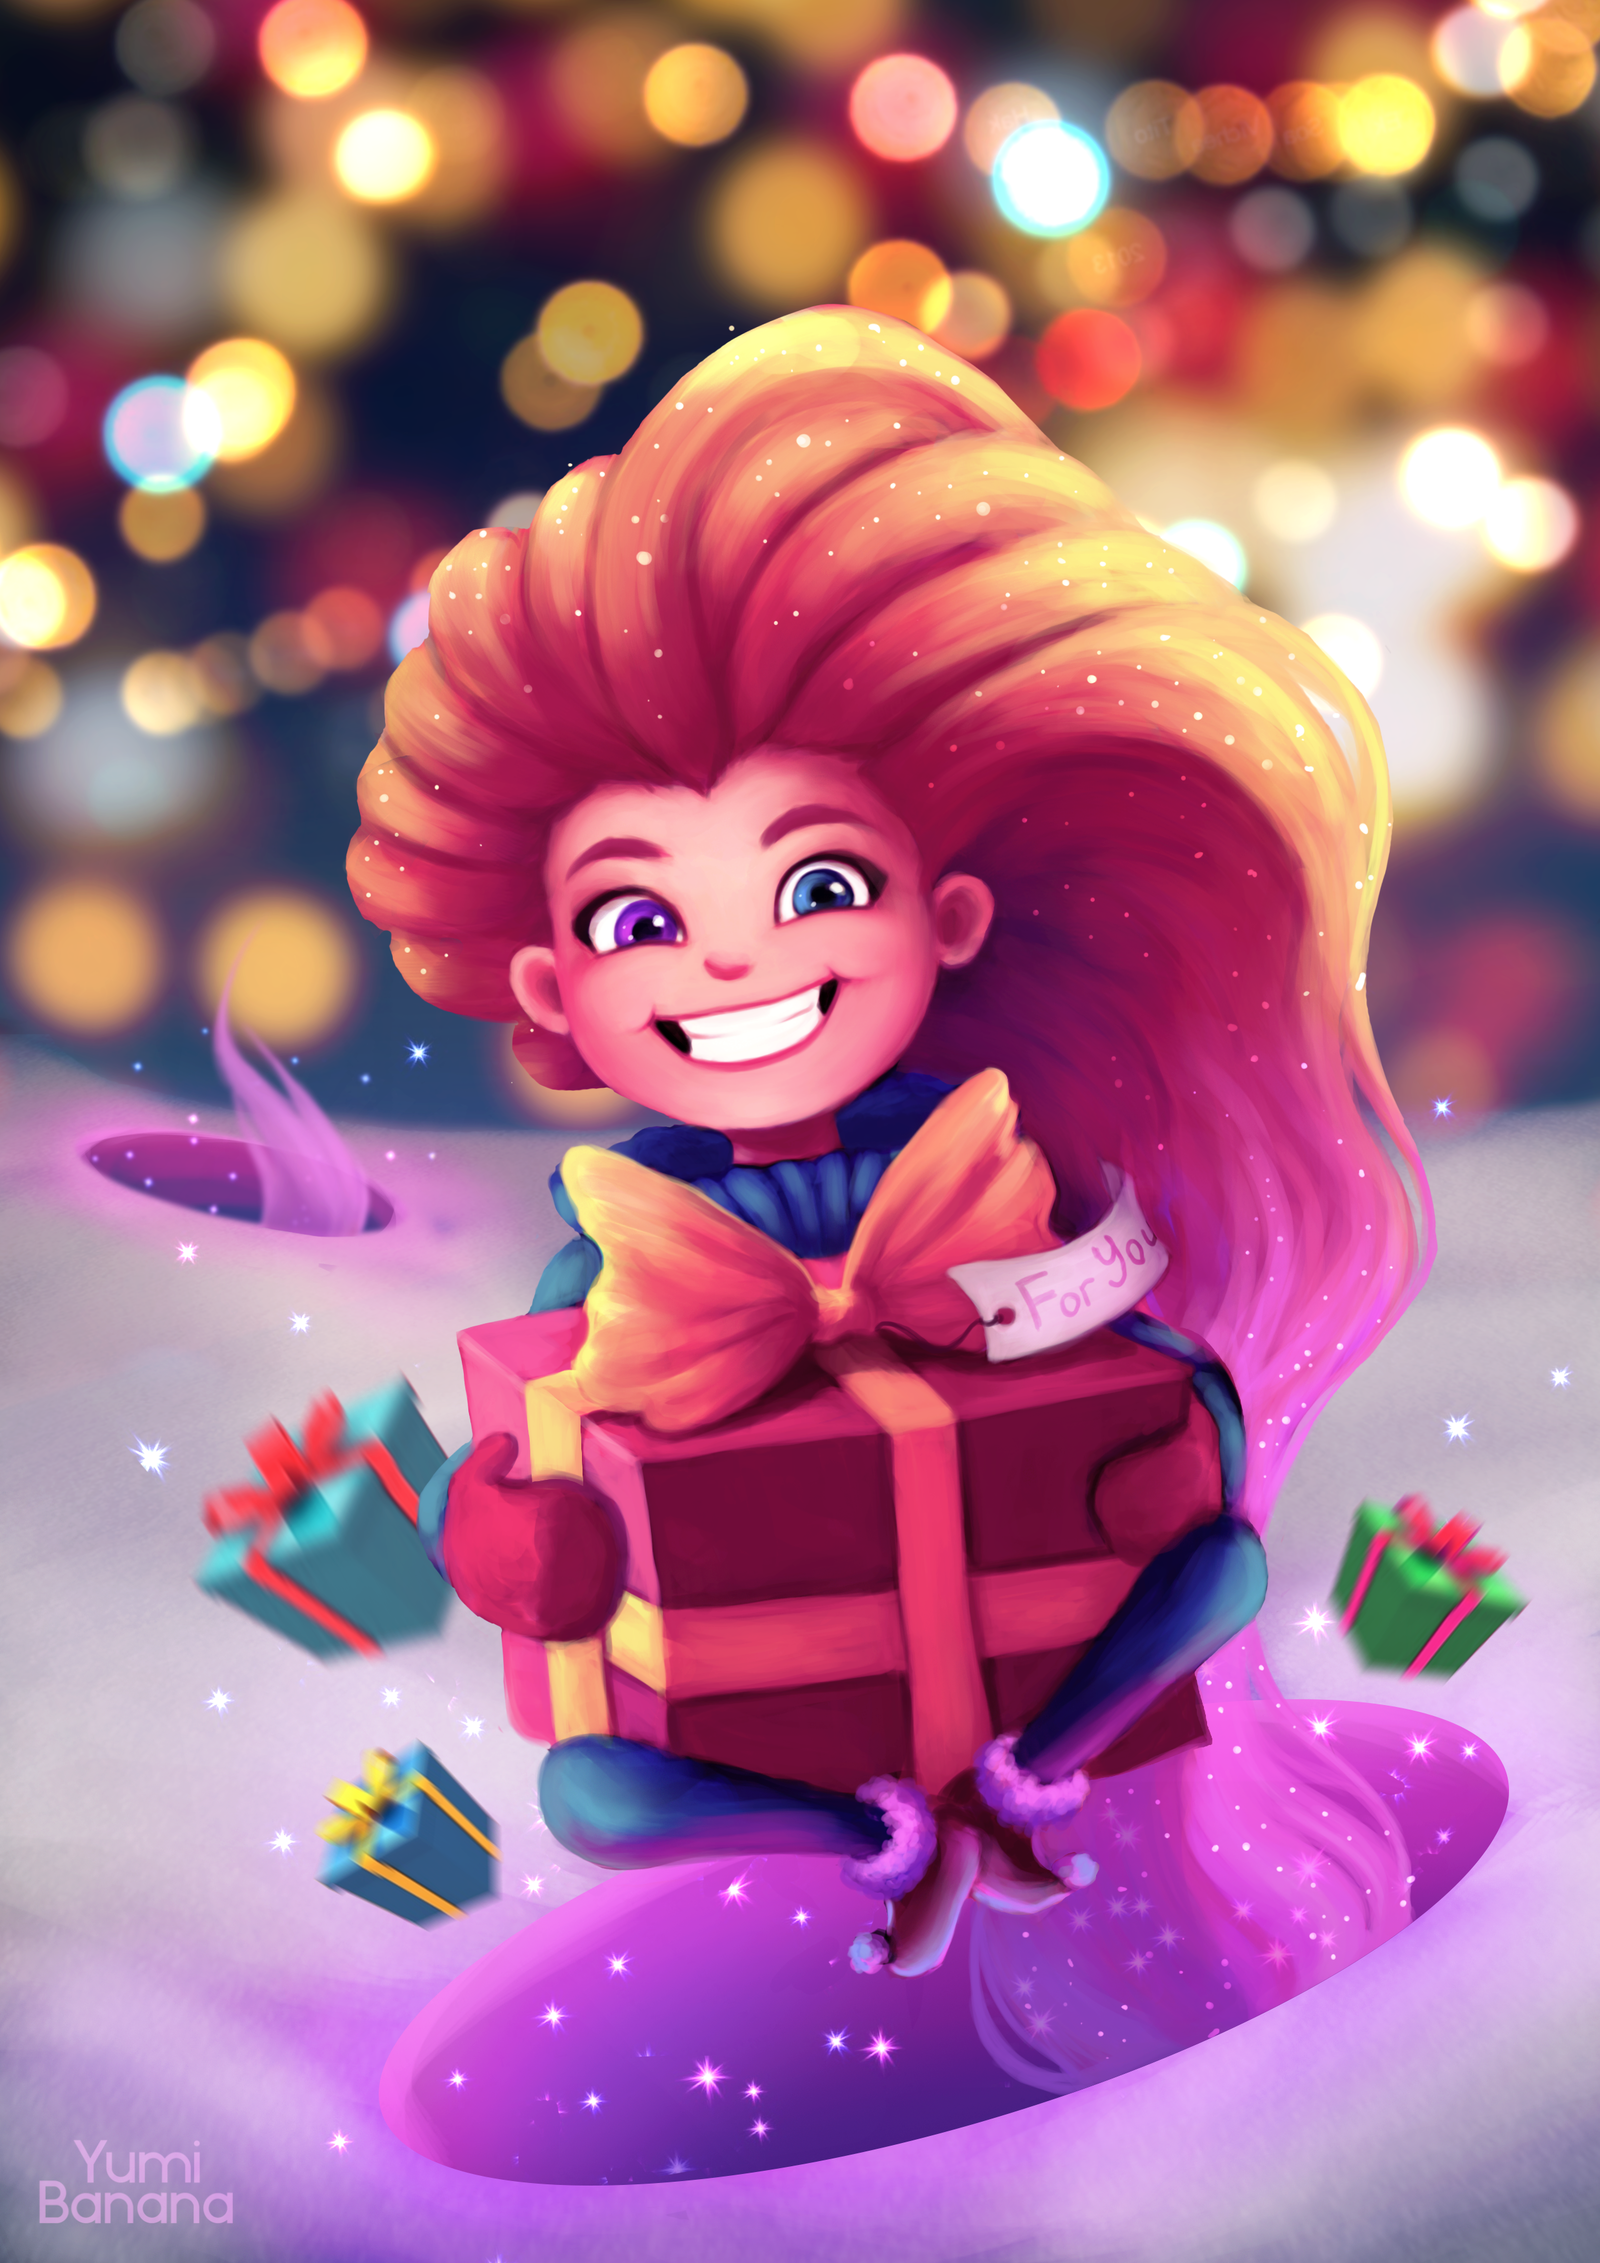 Holiday greetings! :) - Games, Digital drawing, Friday tag is mine, Zoe, League of legends, Holiday greetings, Drawing, Art, My